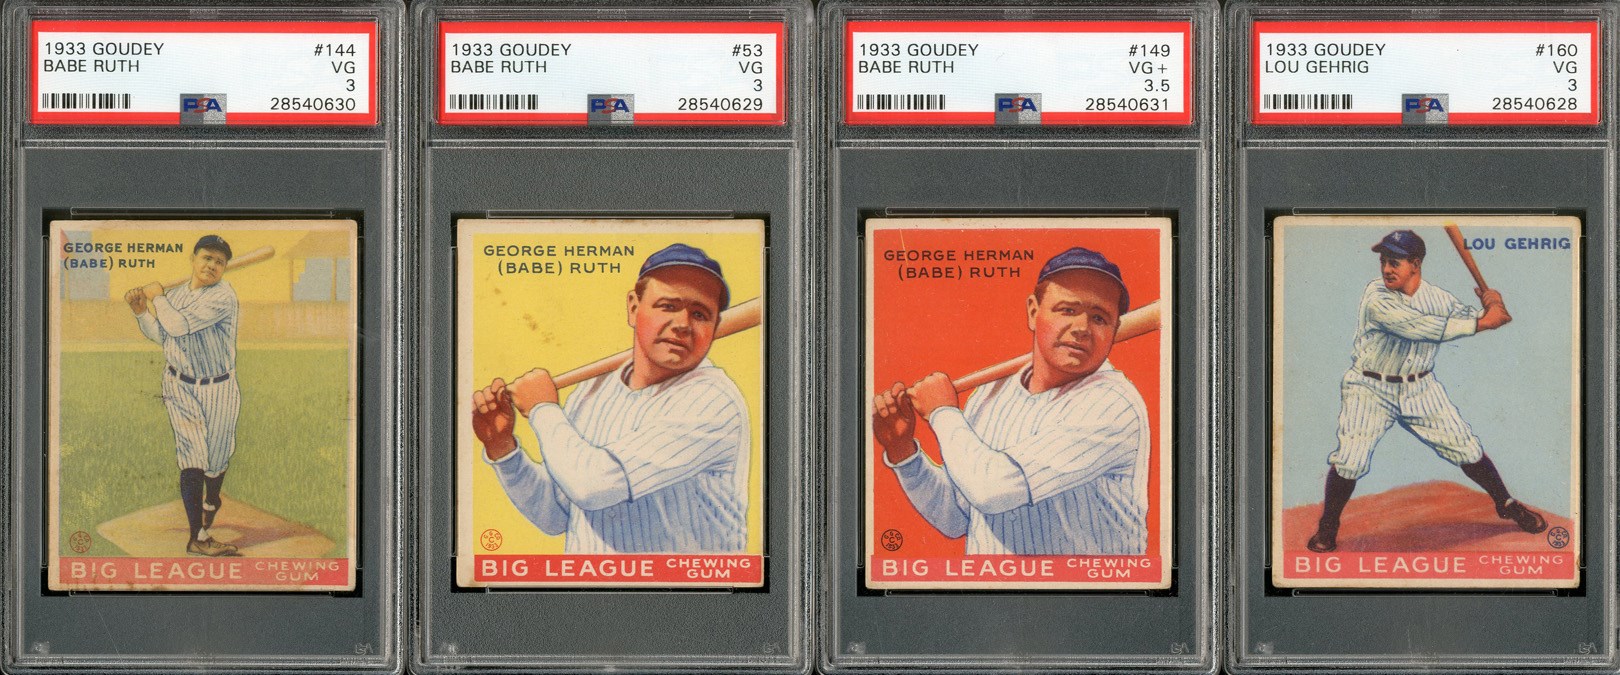 Baseball and Trading Cards - 1933 Goudey Collection with Three Ruths and One Gehrig